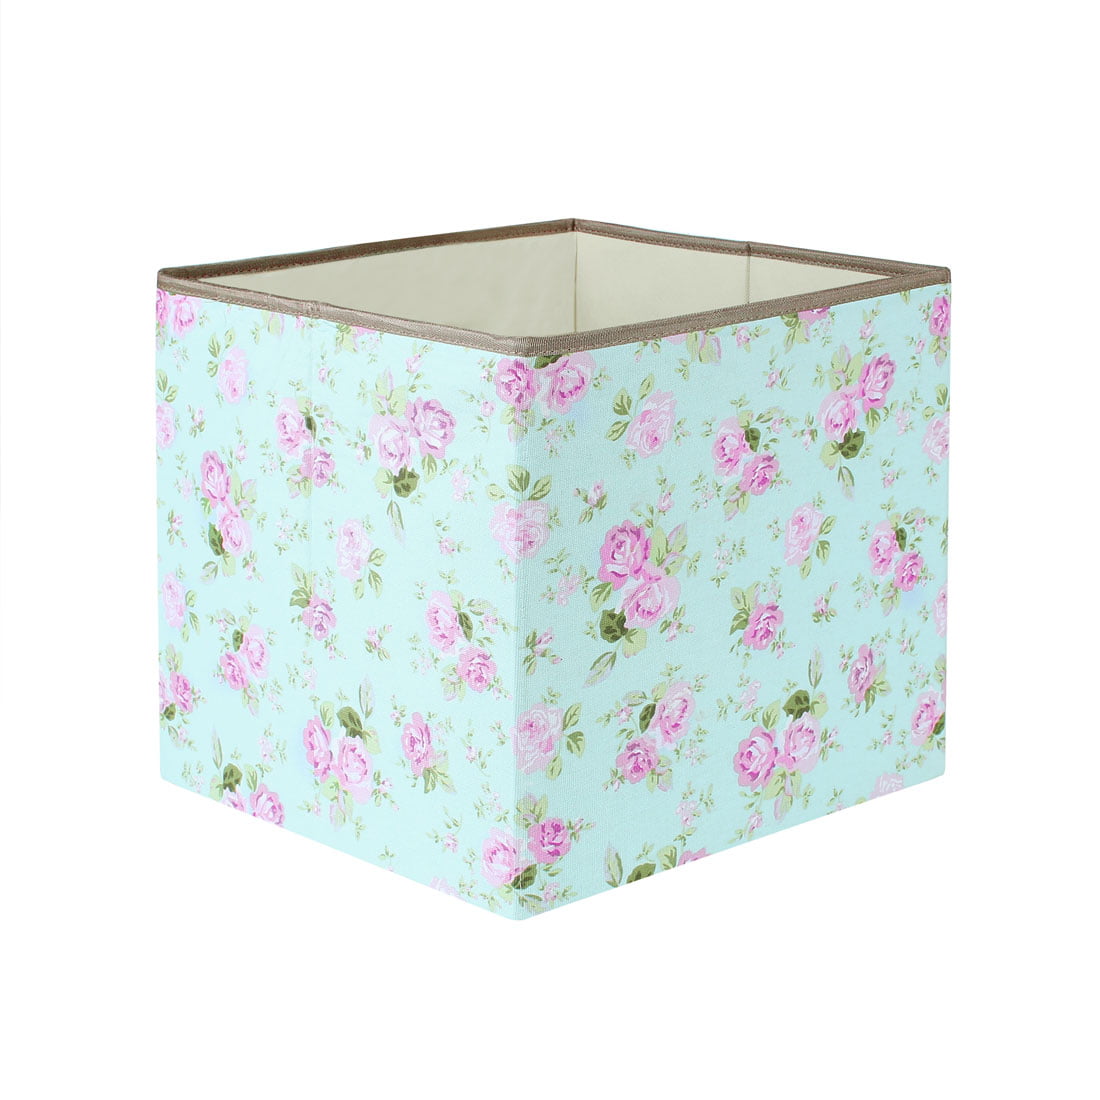 Fabric Laundry Baskets Storage Bin with Handle for Underbed Closet Cube INough Floral Storage Bins,Collapsible Storage Basket Toys Clothes Crafts Organizer Small, Floral 